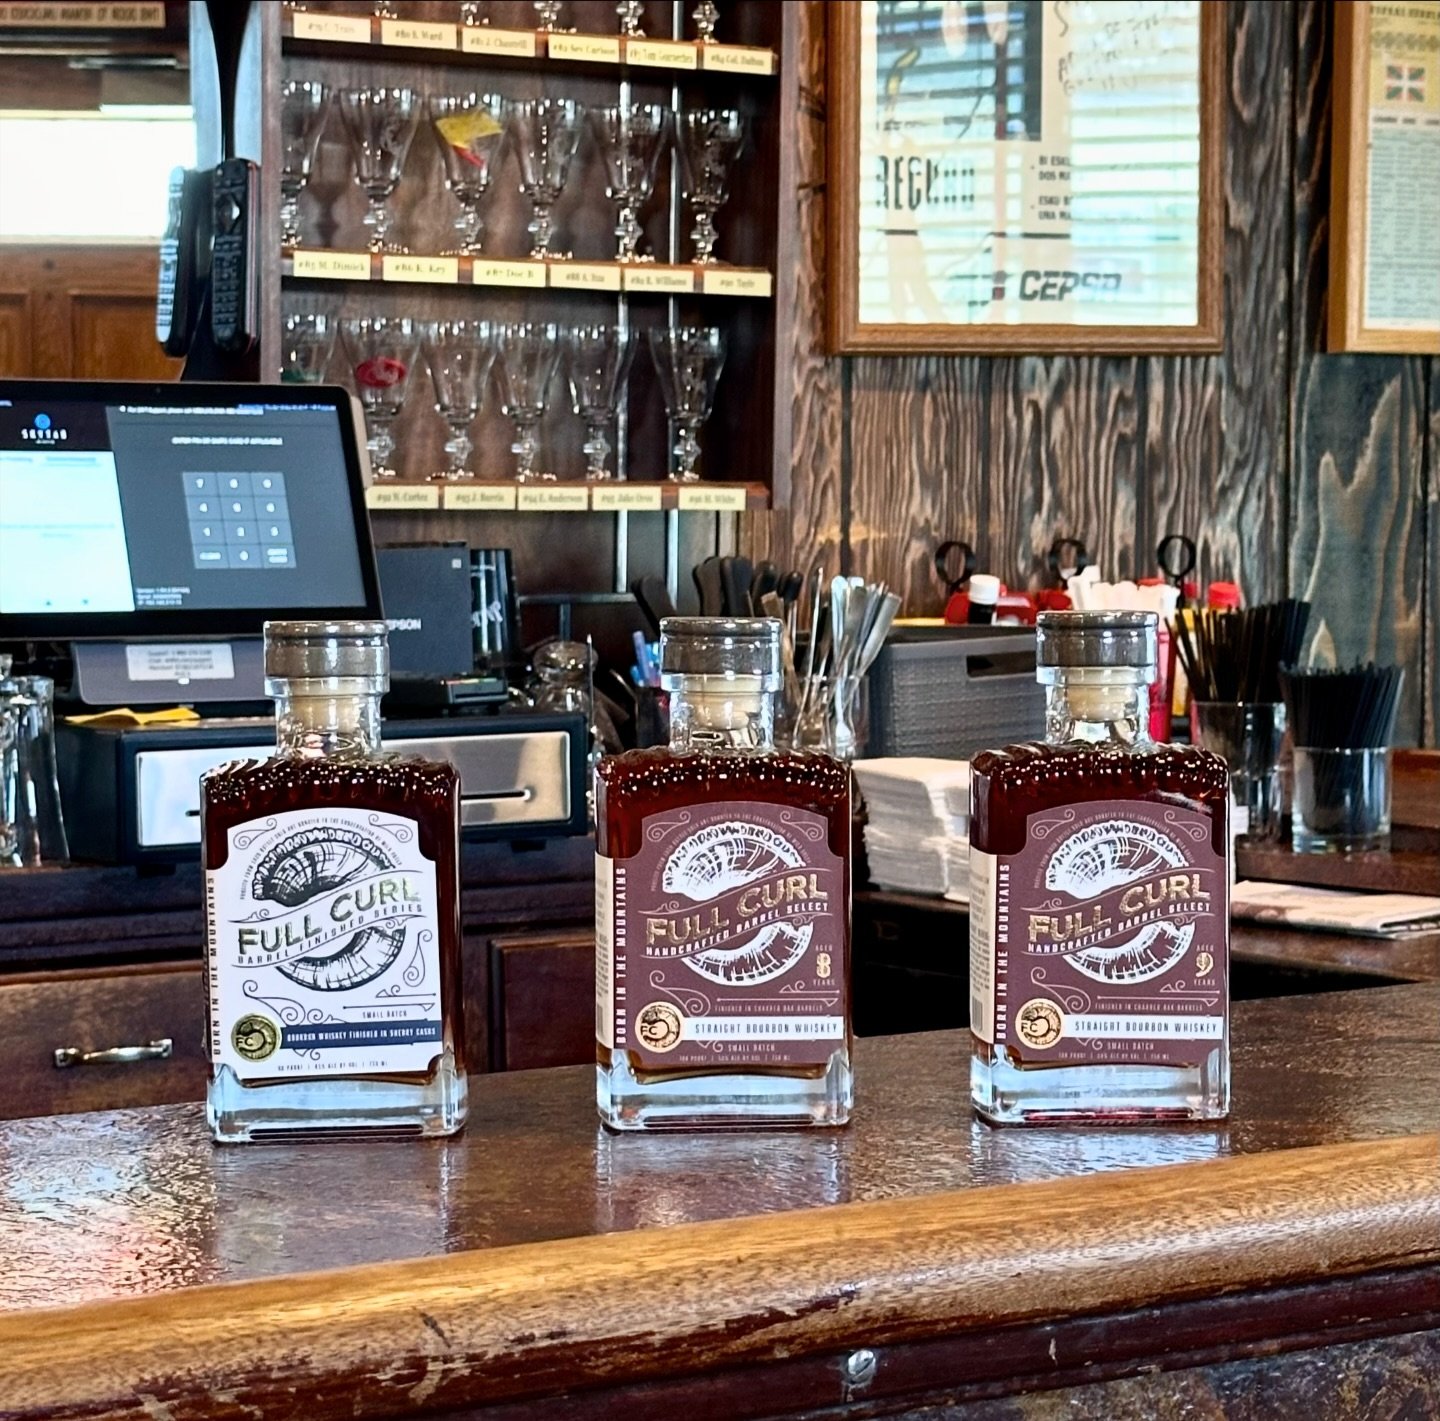 We&rsquo;re excited to feature Full Curl Bourbon Whisky at The Star bar! 🥃 
Not only is it smoky, rich, and bold, but it also supports a great cause! For every bottle sold, a portion of the profits goes to the Wild Sheep Foundation, helping restore 